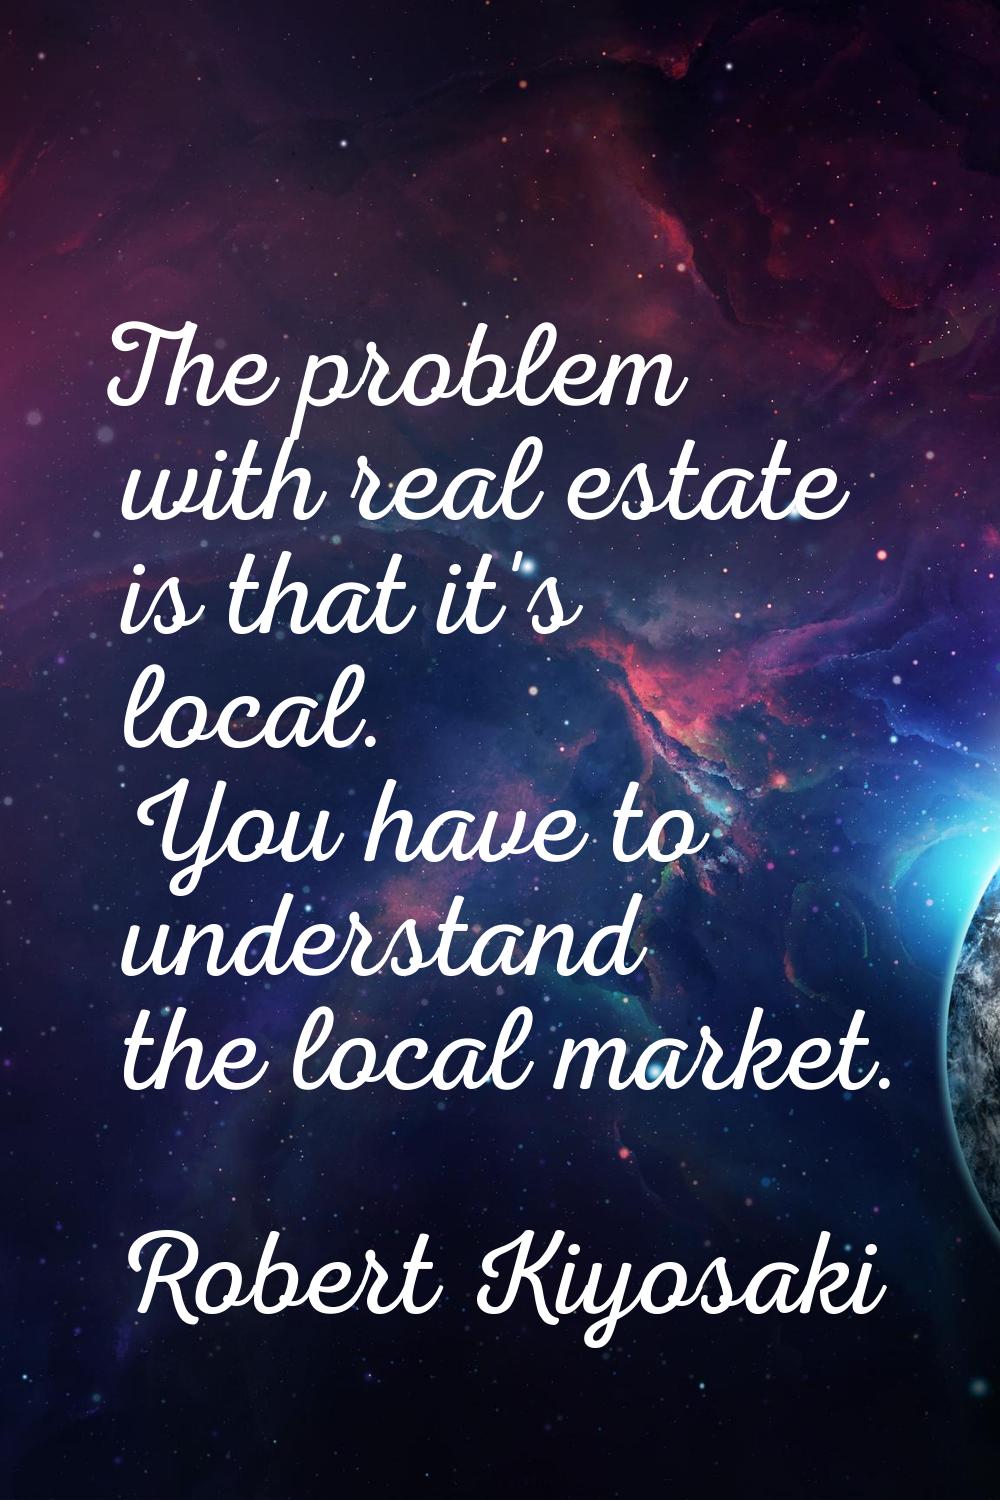 The problem with real estate is that it's local. You have to understand the local market.